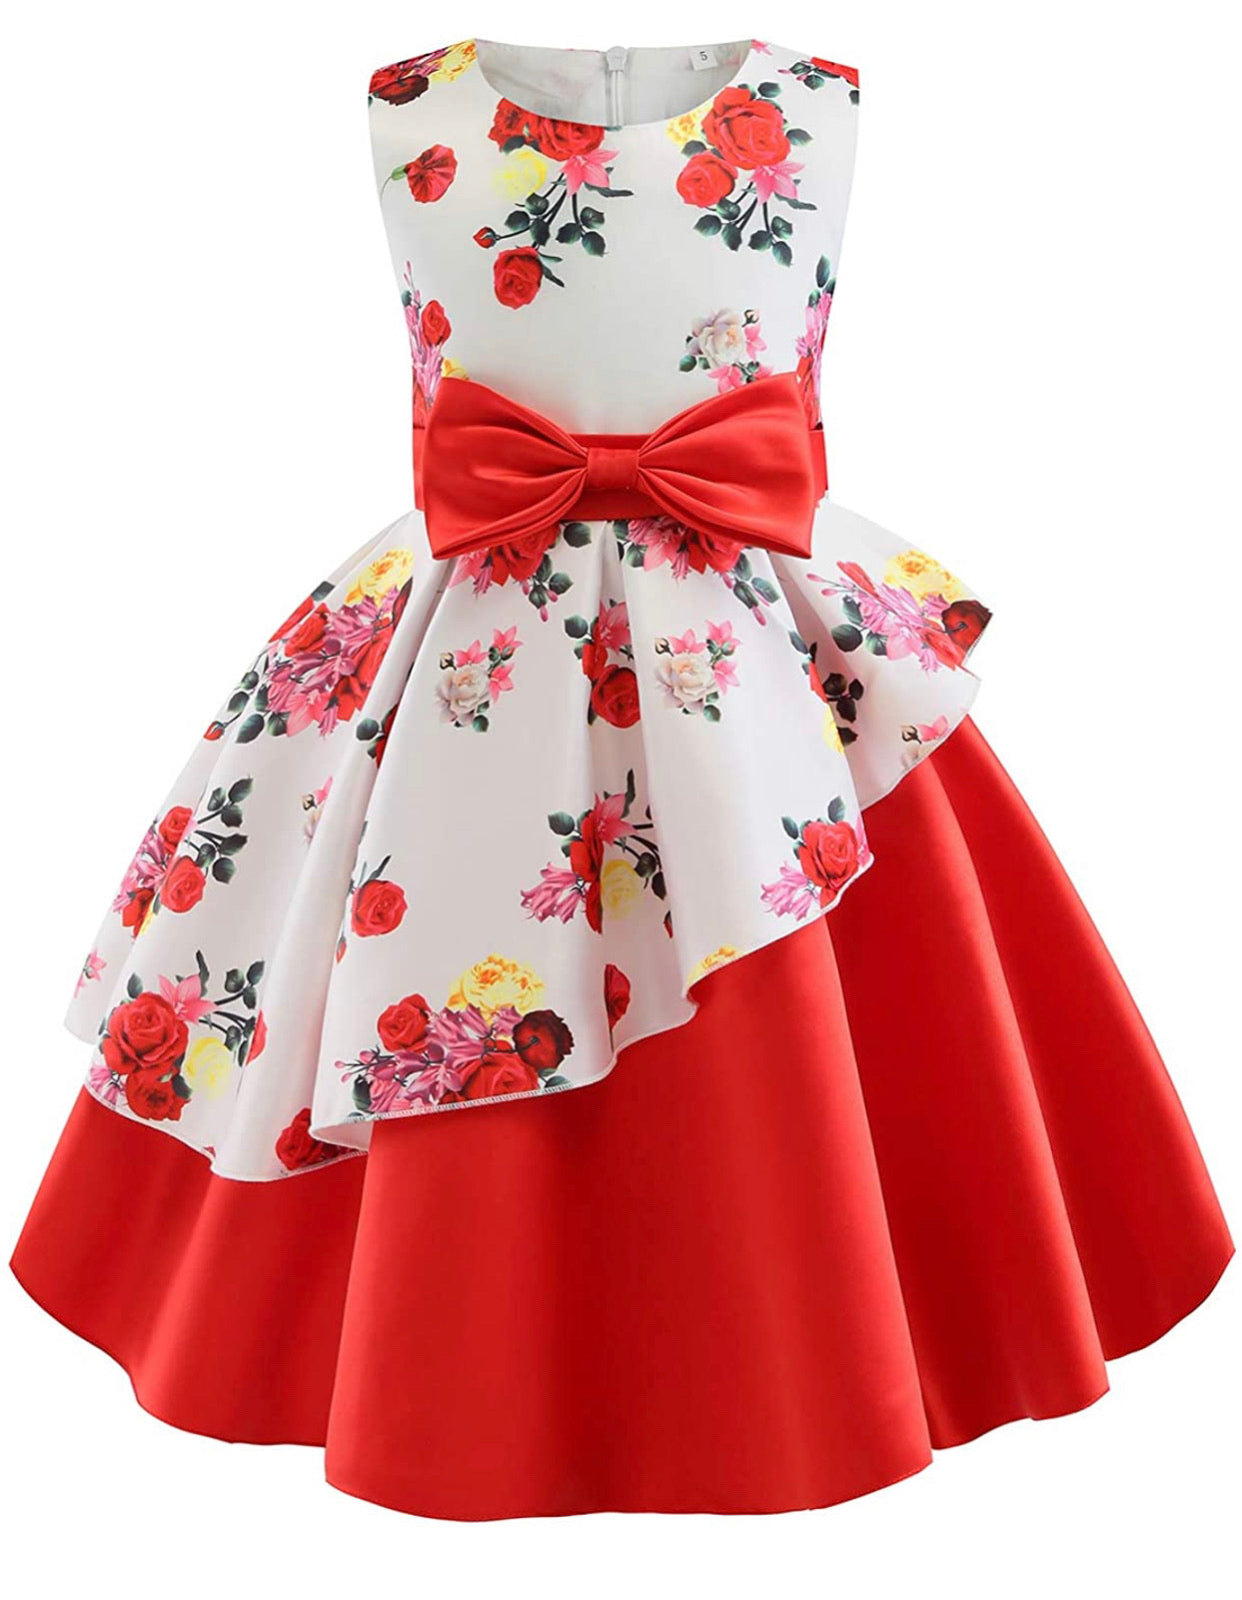 Little Girl’s Formal Floral Print Dress, Sizes 2T - 9 years (Red)